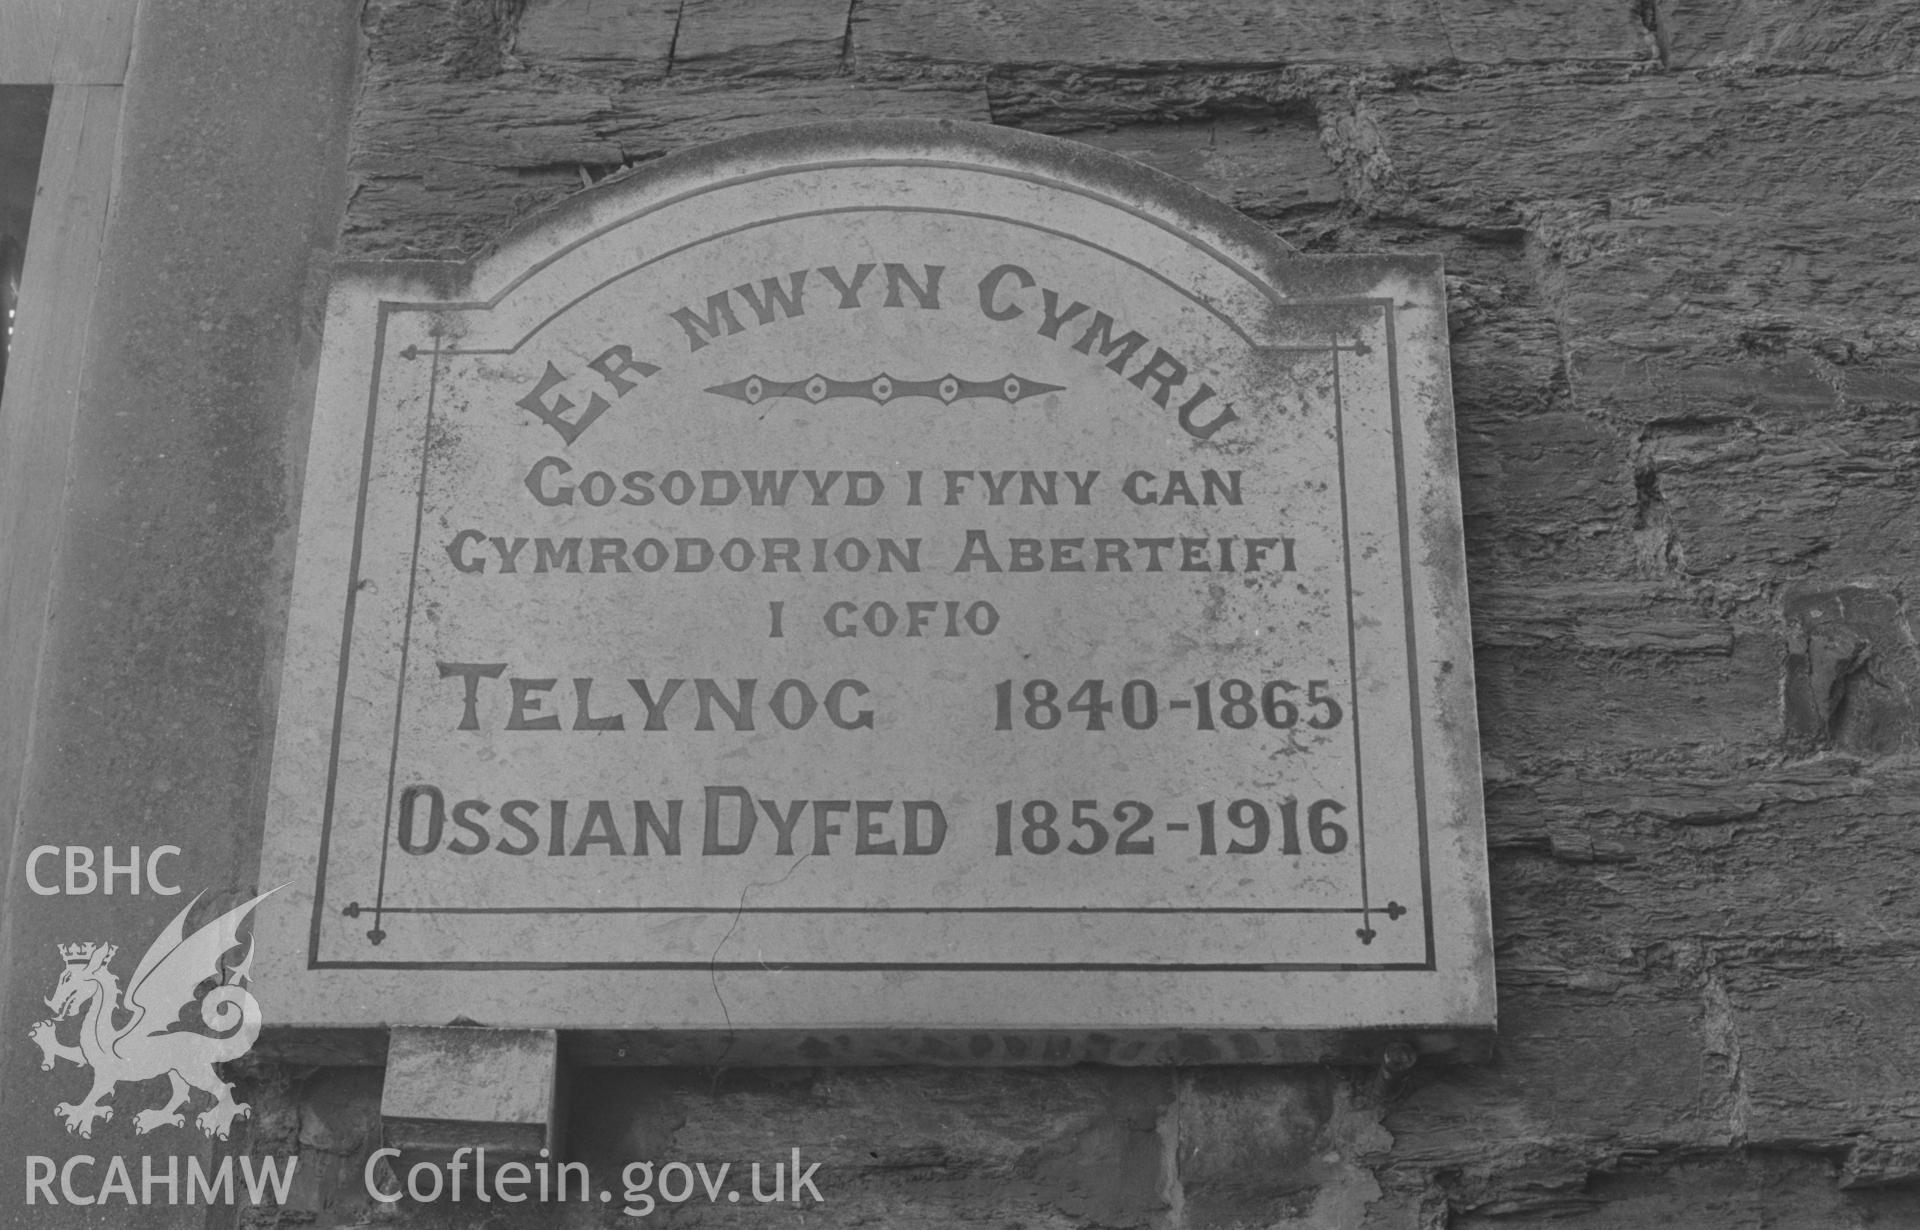 Digital copy of a black and white negative showing memorial plaque (unveiled in 1927 to the memory of Telynog and Ossian Dyfed) at the entrance to Eben's Lane, Cardigan. Photographed by Arthur O. Chater on 9th April 1968 looking south from SN 178 461.